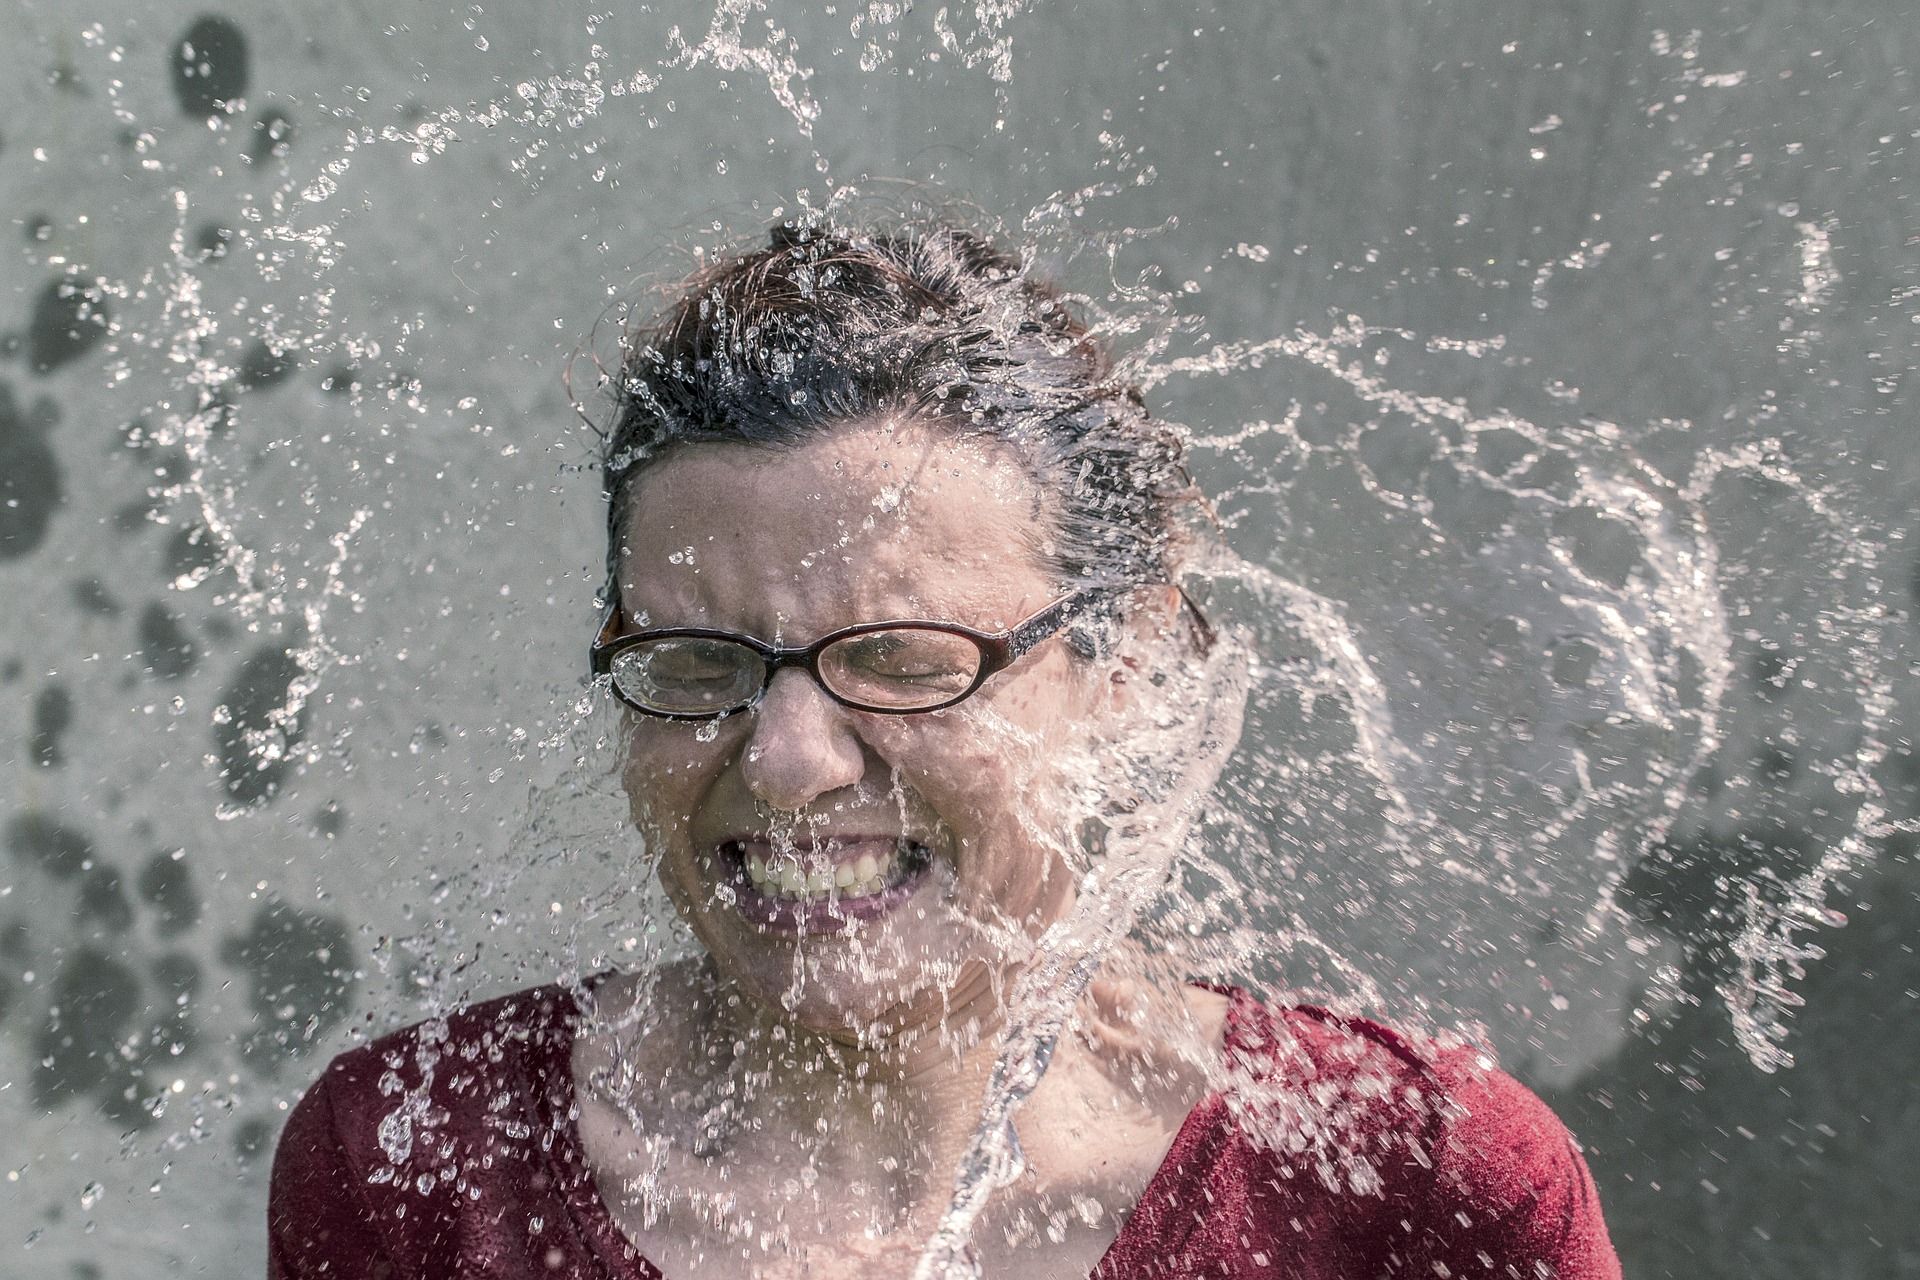 Lady getting splashed with water in the face